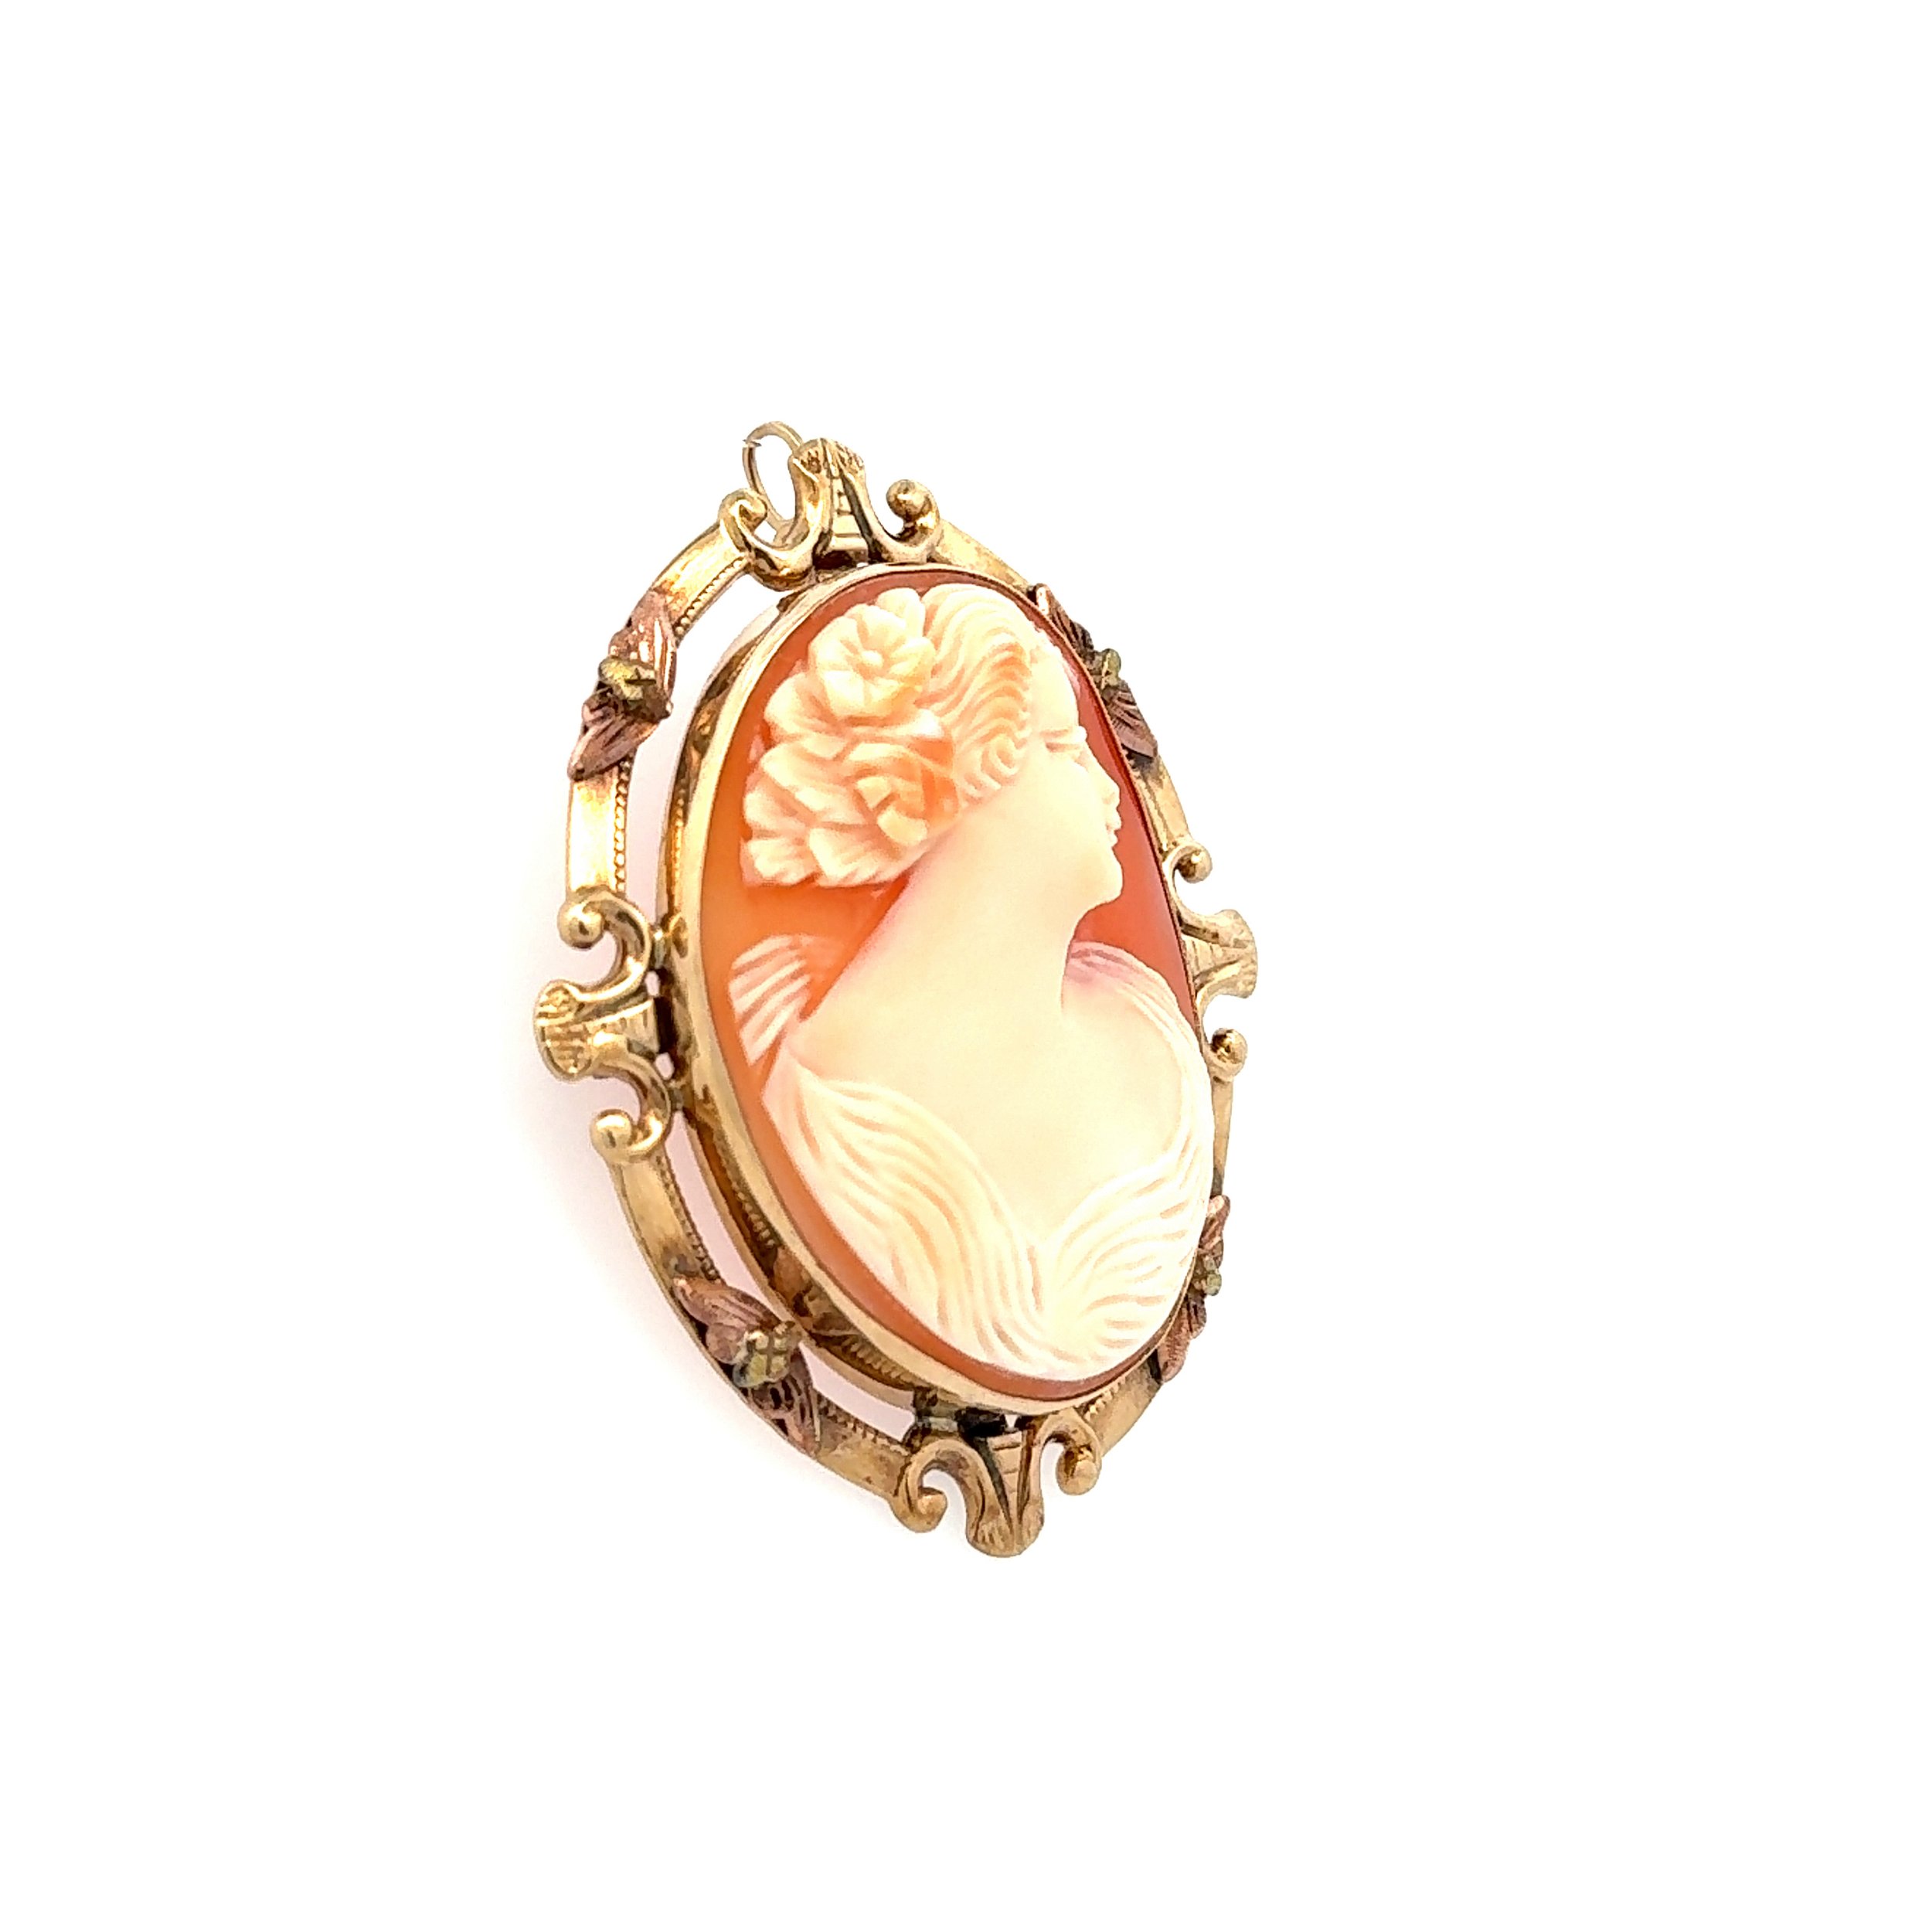 10K 2tone Victorian Revival Carved Lady Shell Cameo Brooch Pendant 11.0g, 1.9"